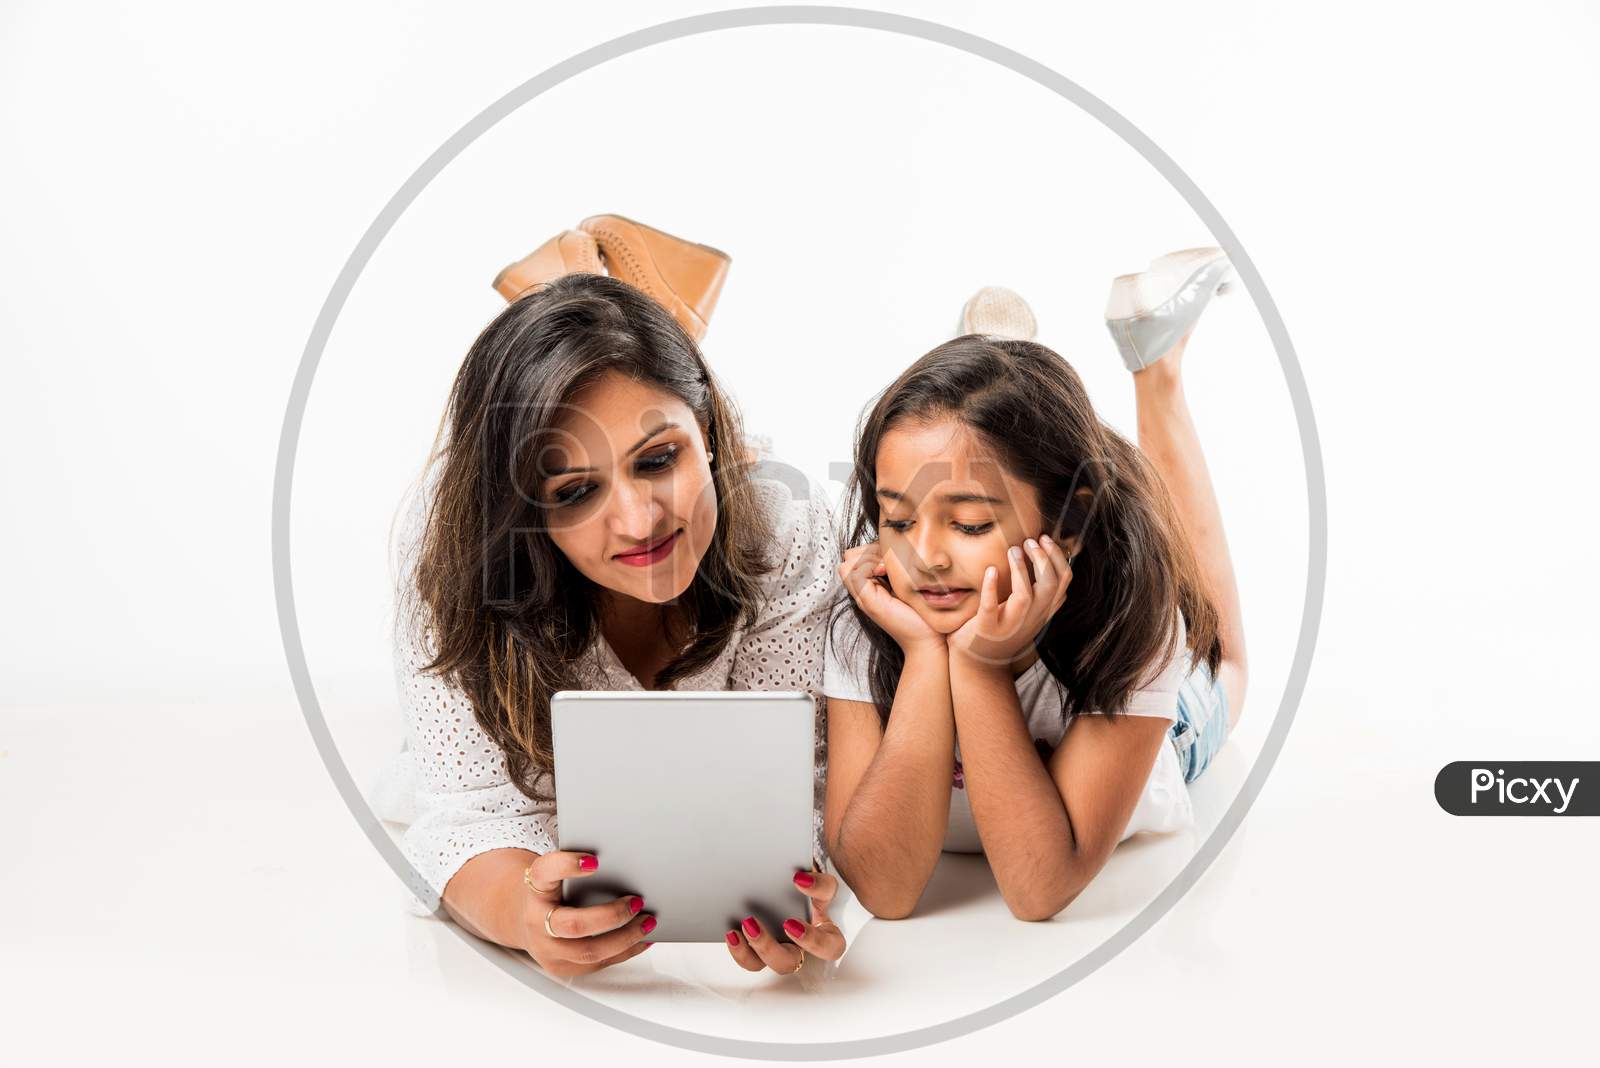 Indian mother and daughter lying on floor with book, laptop or tablet computer studying or readying story or playing games